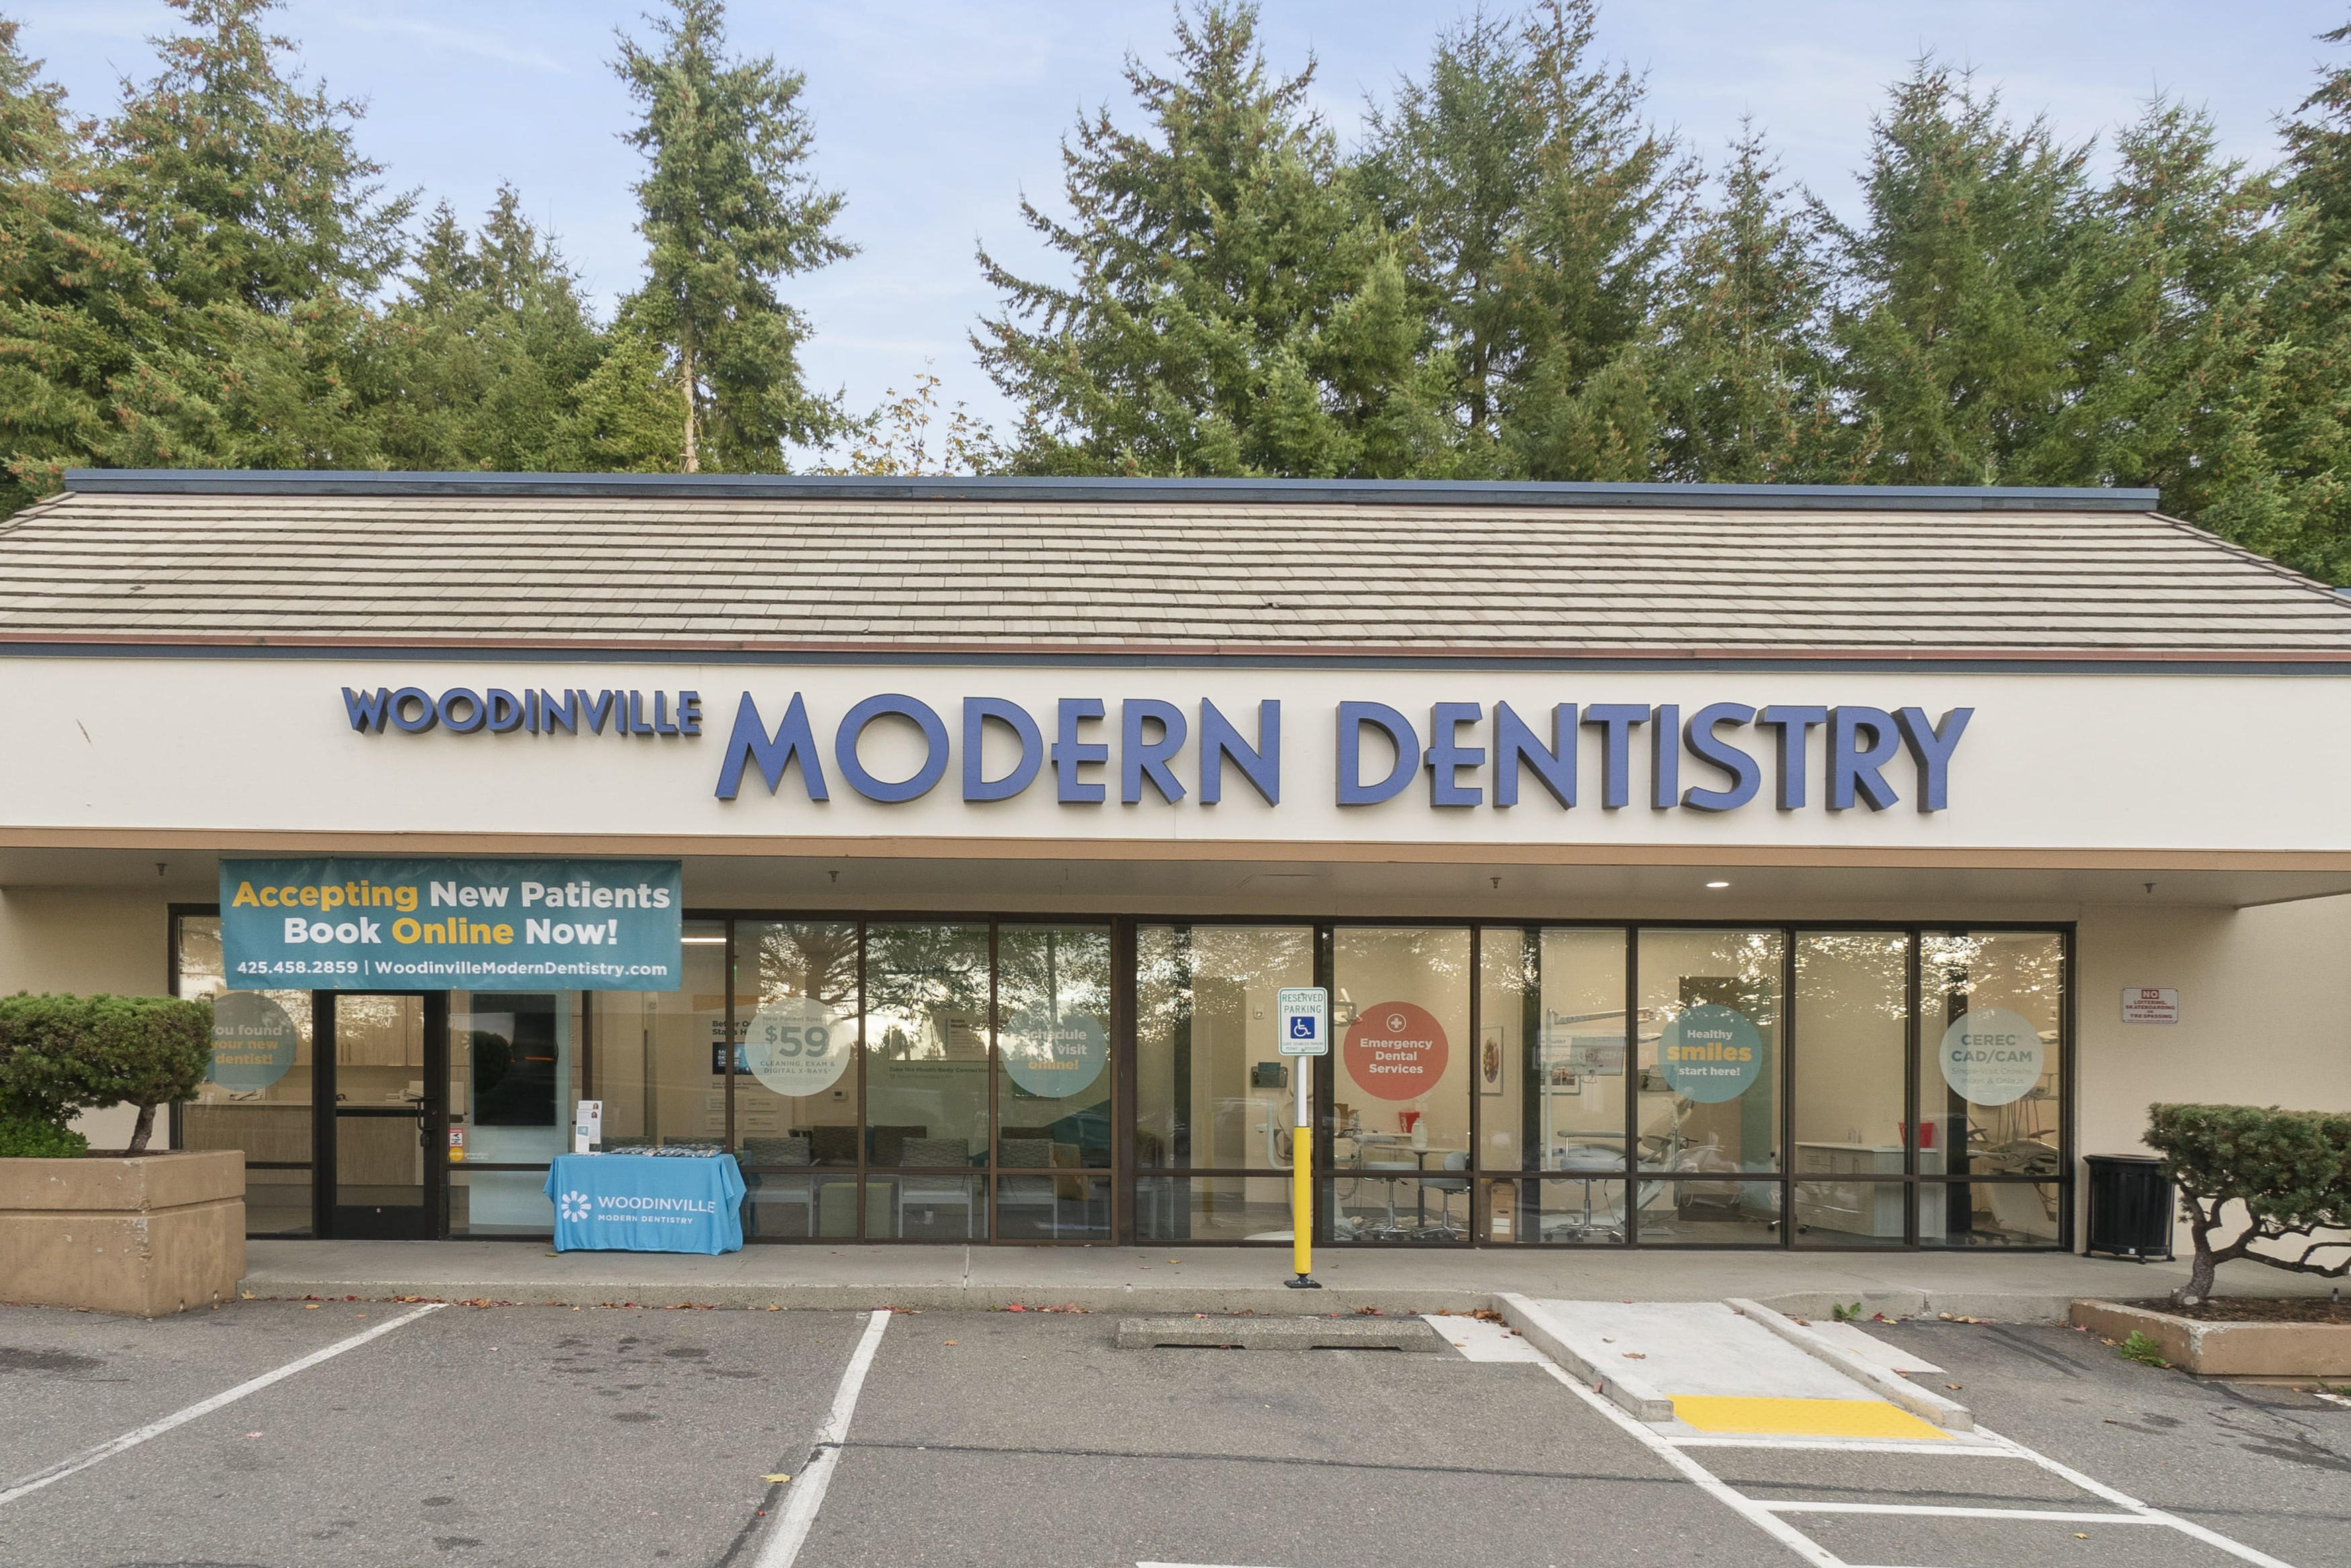 Welcome to Woodinville Modern Dentistry in Woodinville WA!